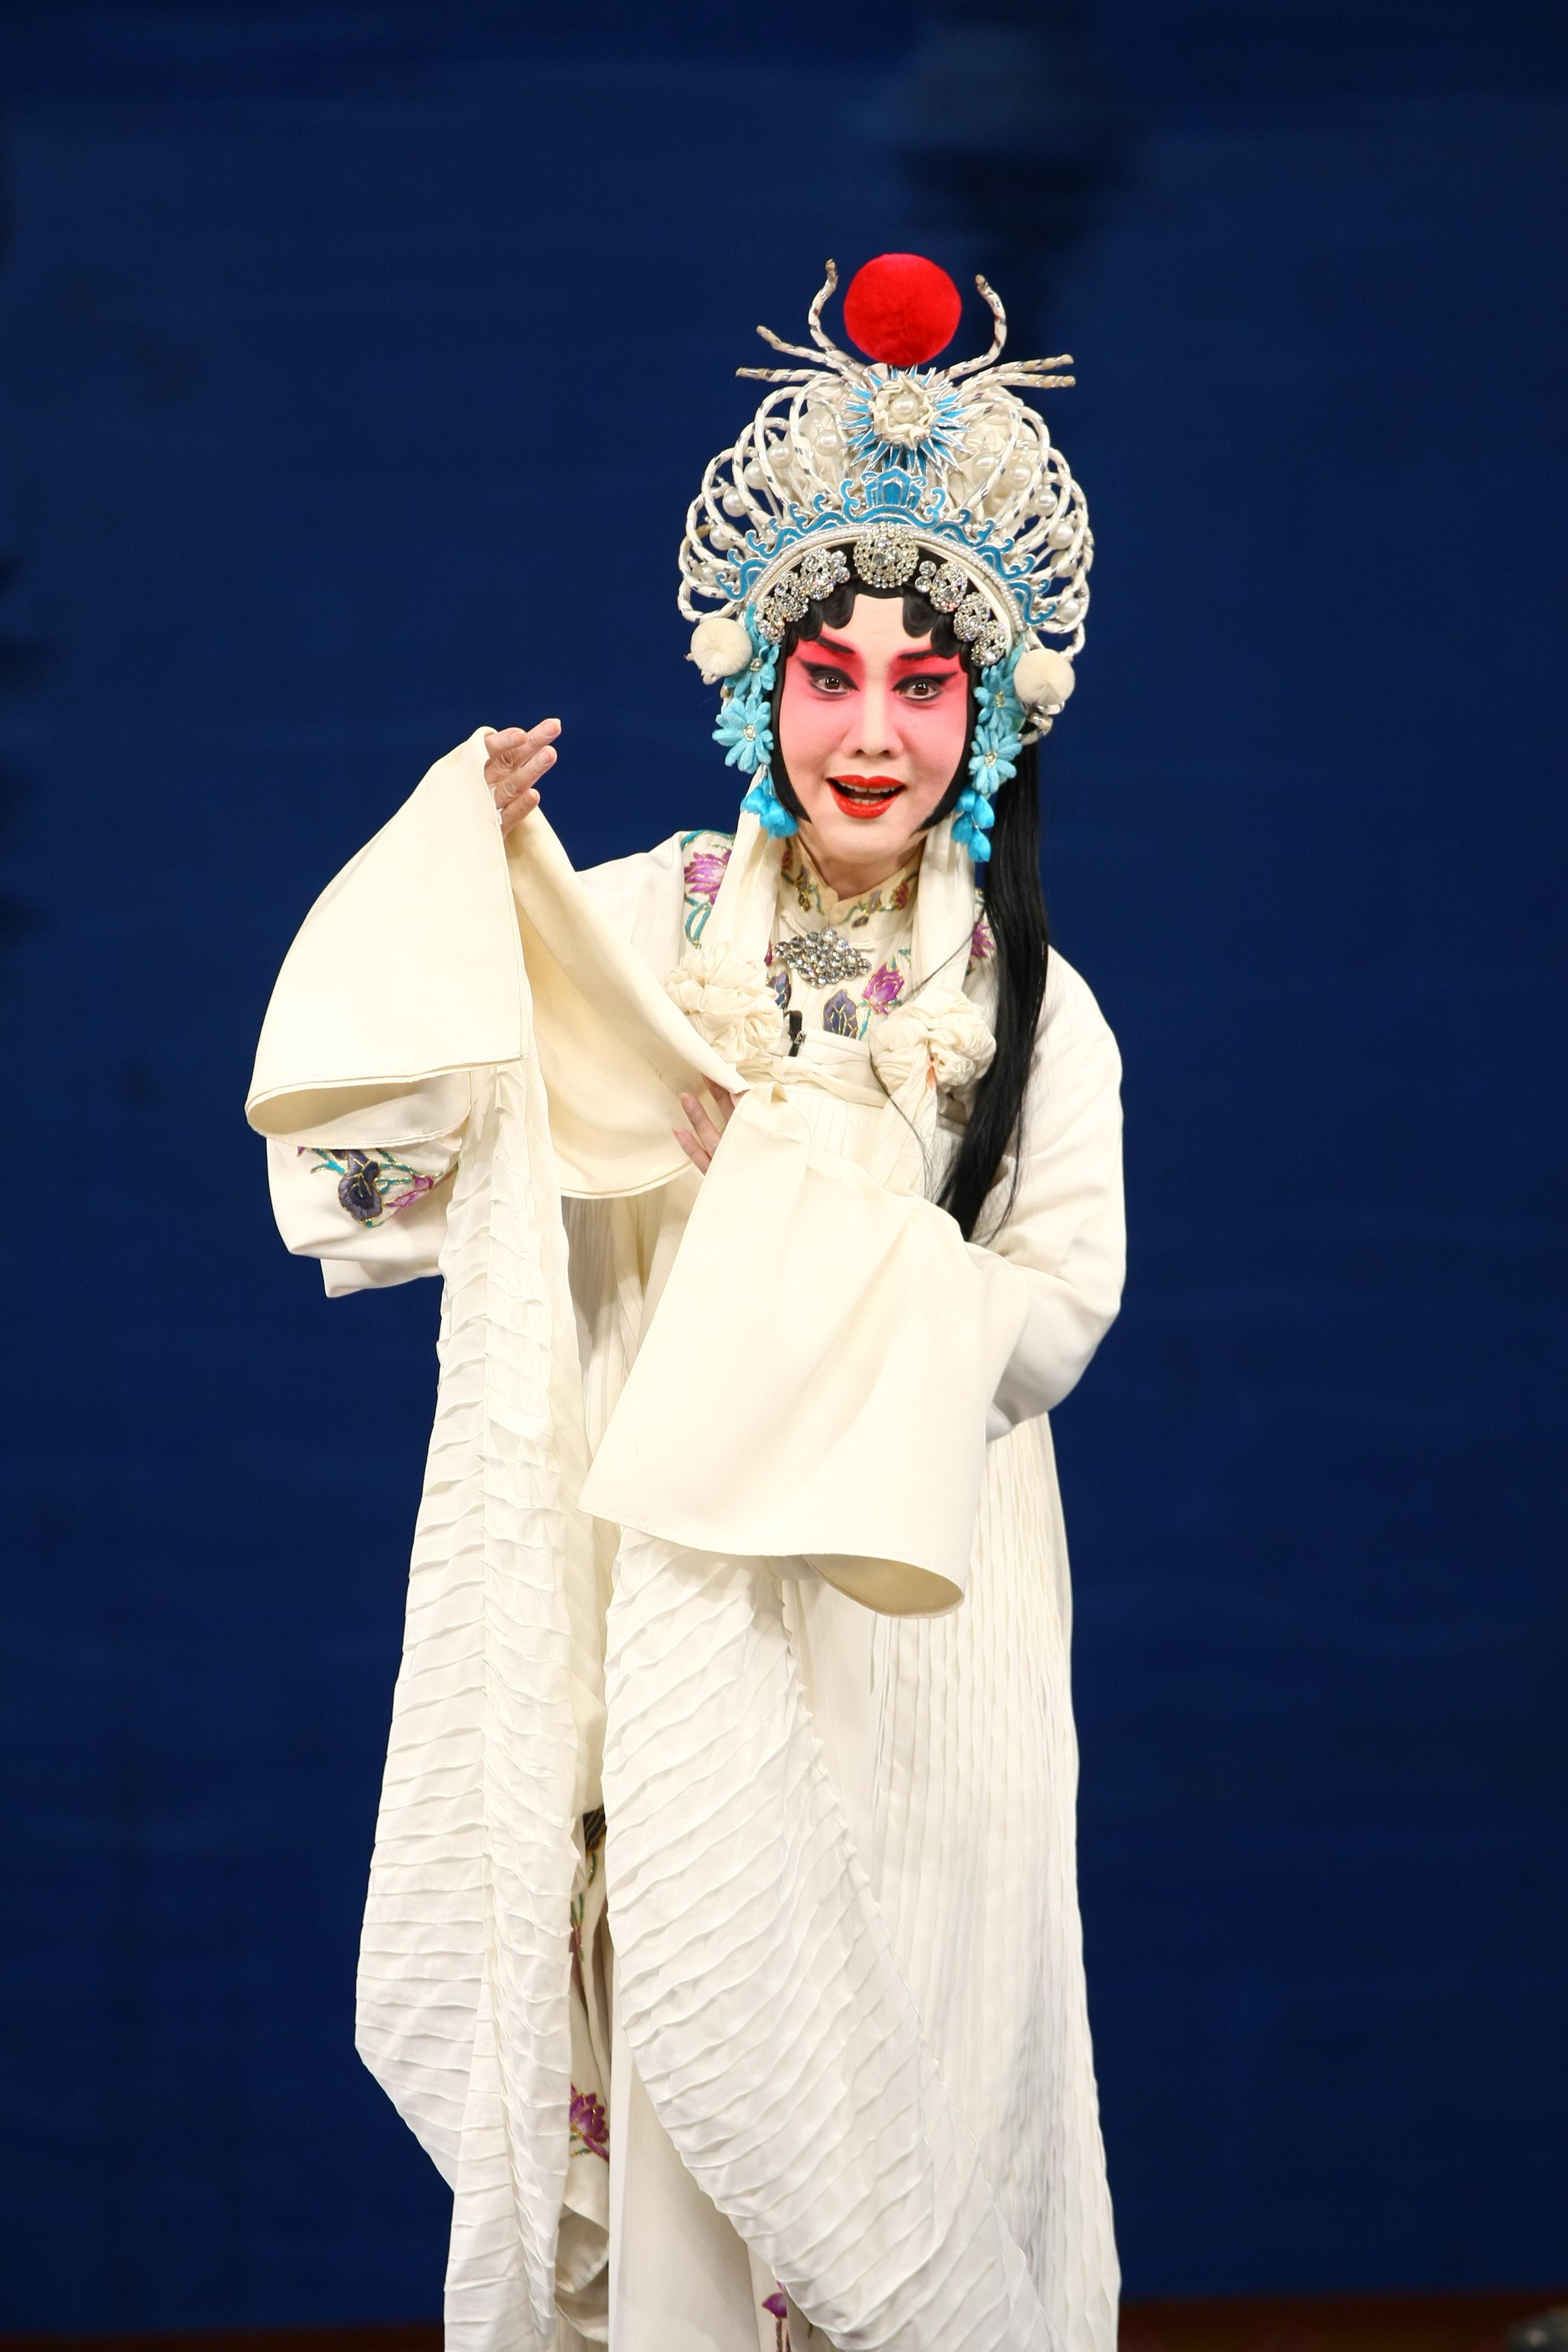 The Leisure and Cultural Services Department has invited the Peking Opera Theatre of Beijing to come to Hong Kong in mid-June to stage three performances of iconic plays, which highlight the artistic legacy of Peking opera master Zhang Junqiu, famed for his qingyi roles, as the opening programme of this year's Chinese Opera Festival. Photo shows a scene of "Jinshan Temple, The Broken Bridge, Leifeng Pagoda".